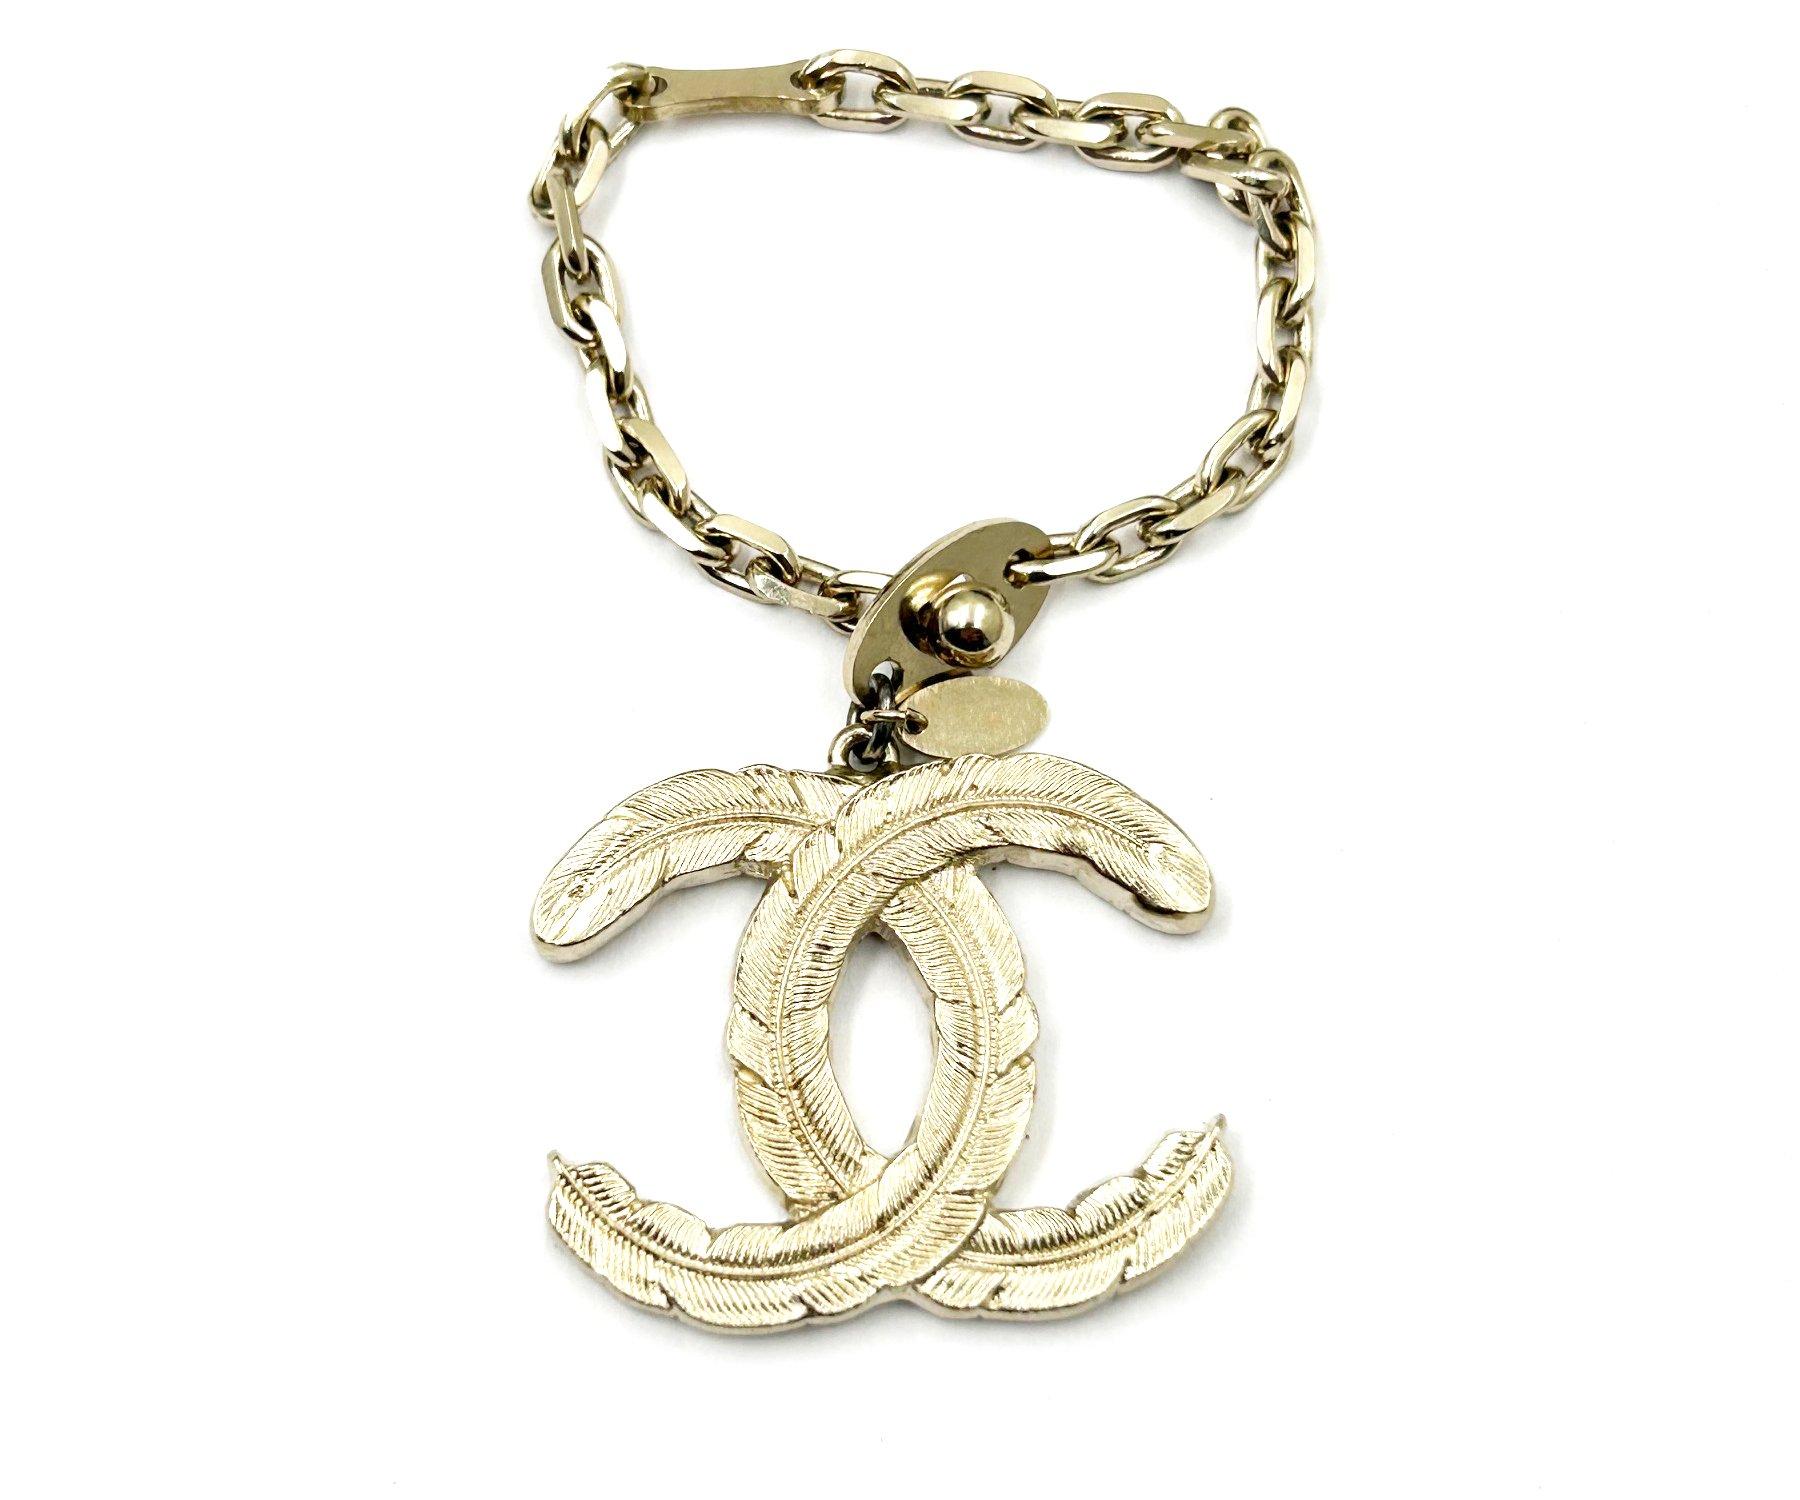 Chanel Light Gold CC Feather Large Pendant Key Charm Key Chain

* Marked 08
* Made in France

-The pendant is approximately 1.5